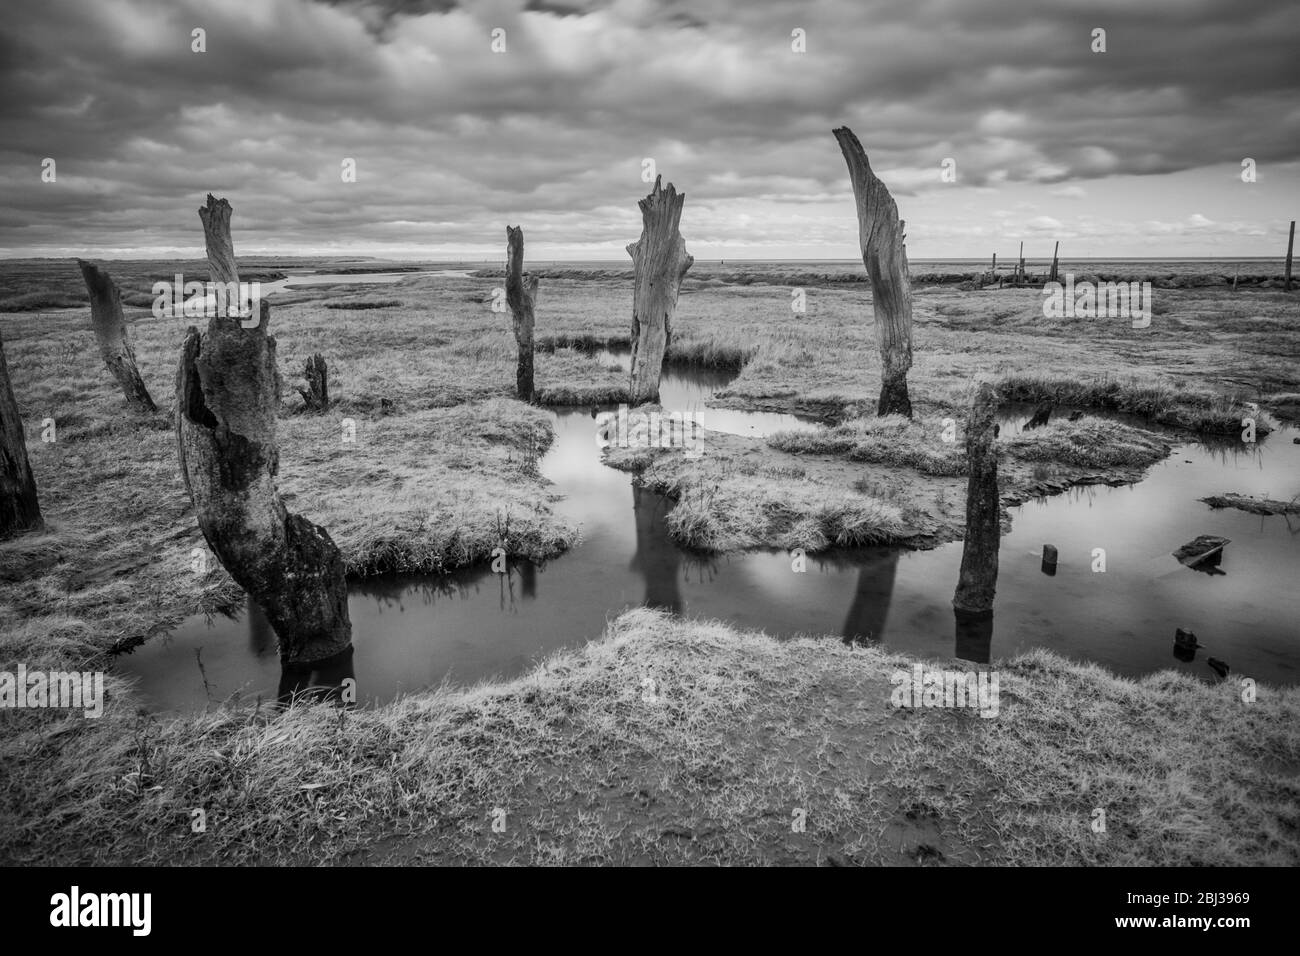 Ancient timber piles in saltmarsh, Thornham, Norfolk, England. Black and white infra red image. Stock Photo